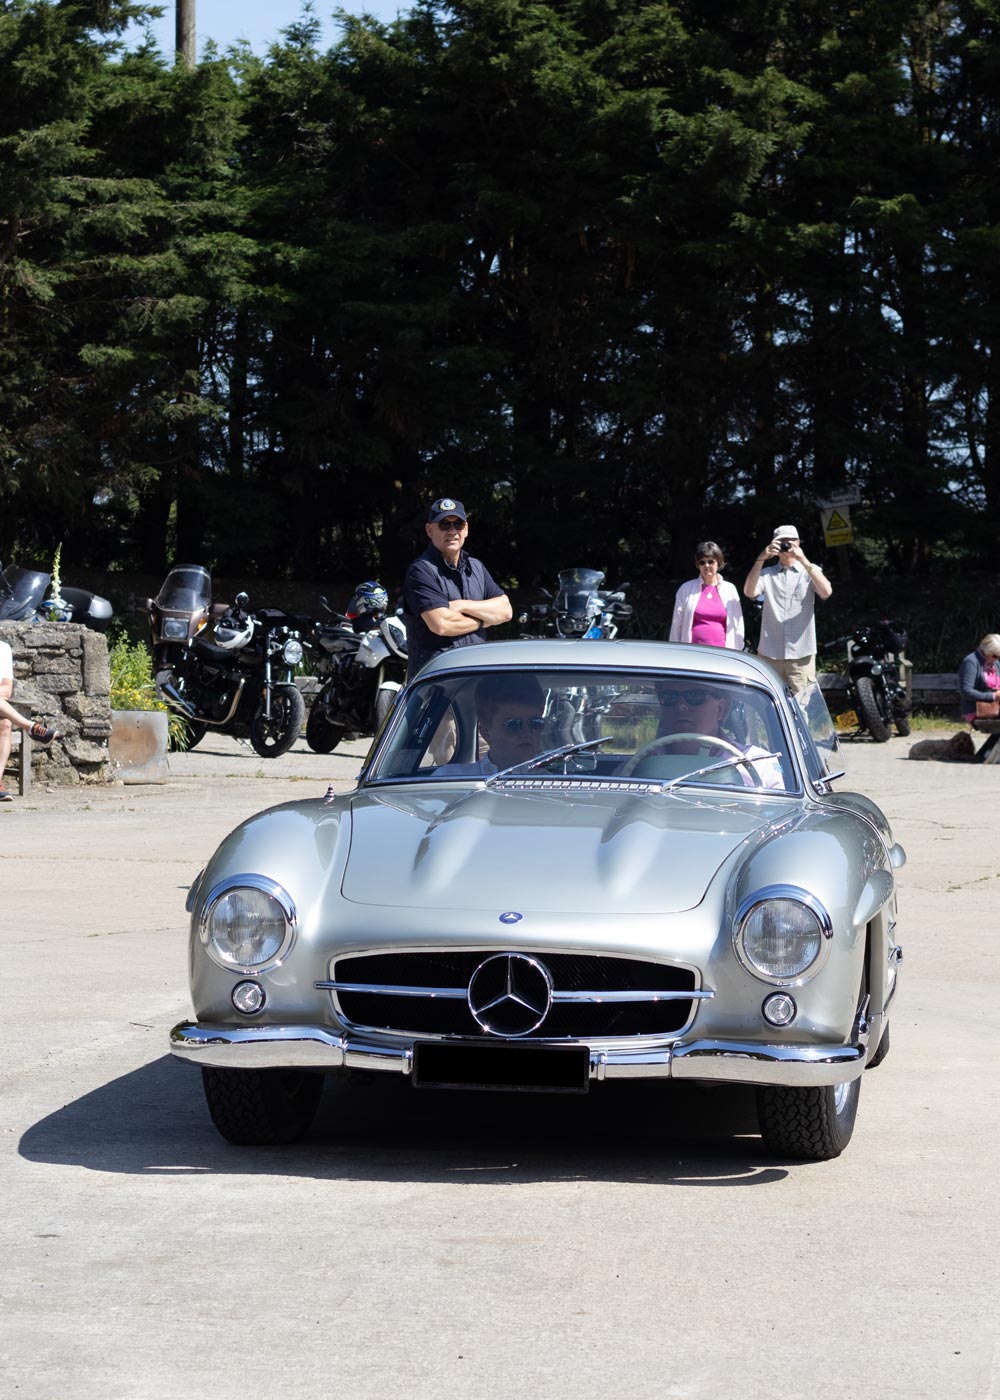 Motoring events at the classic motor hub